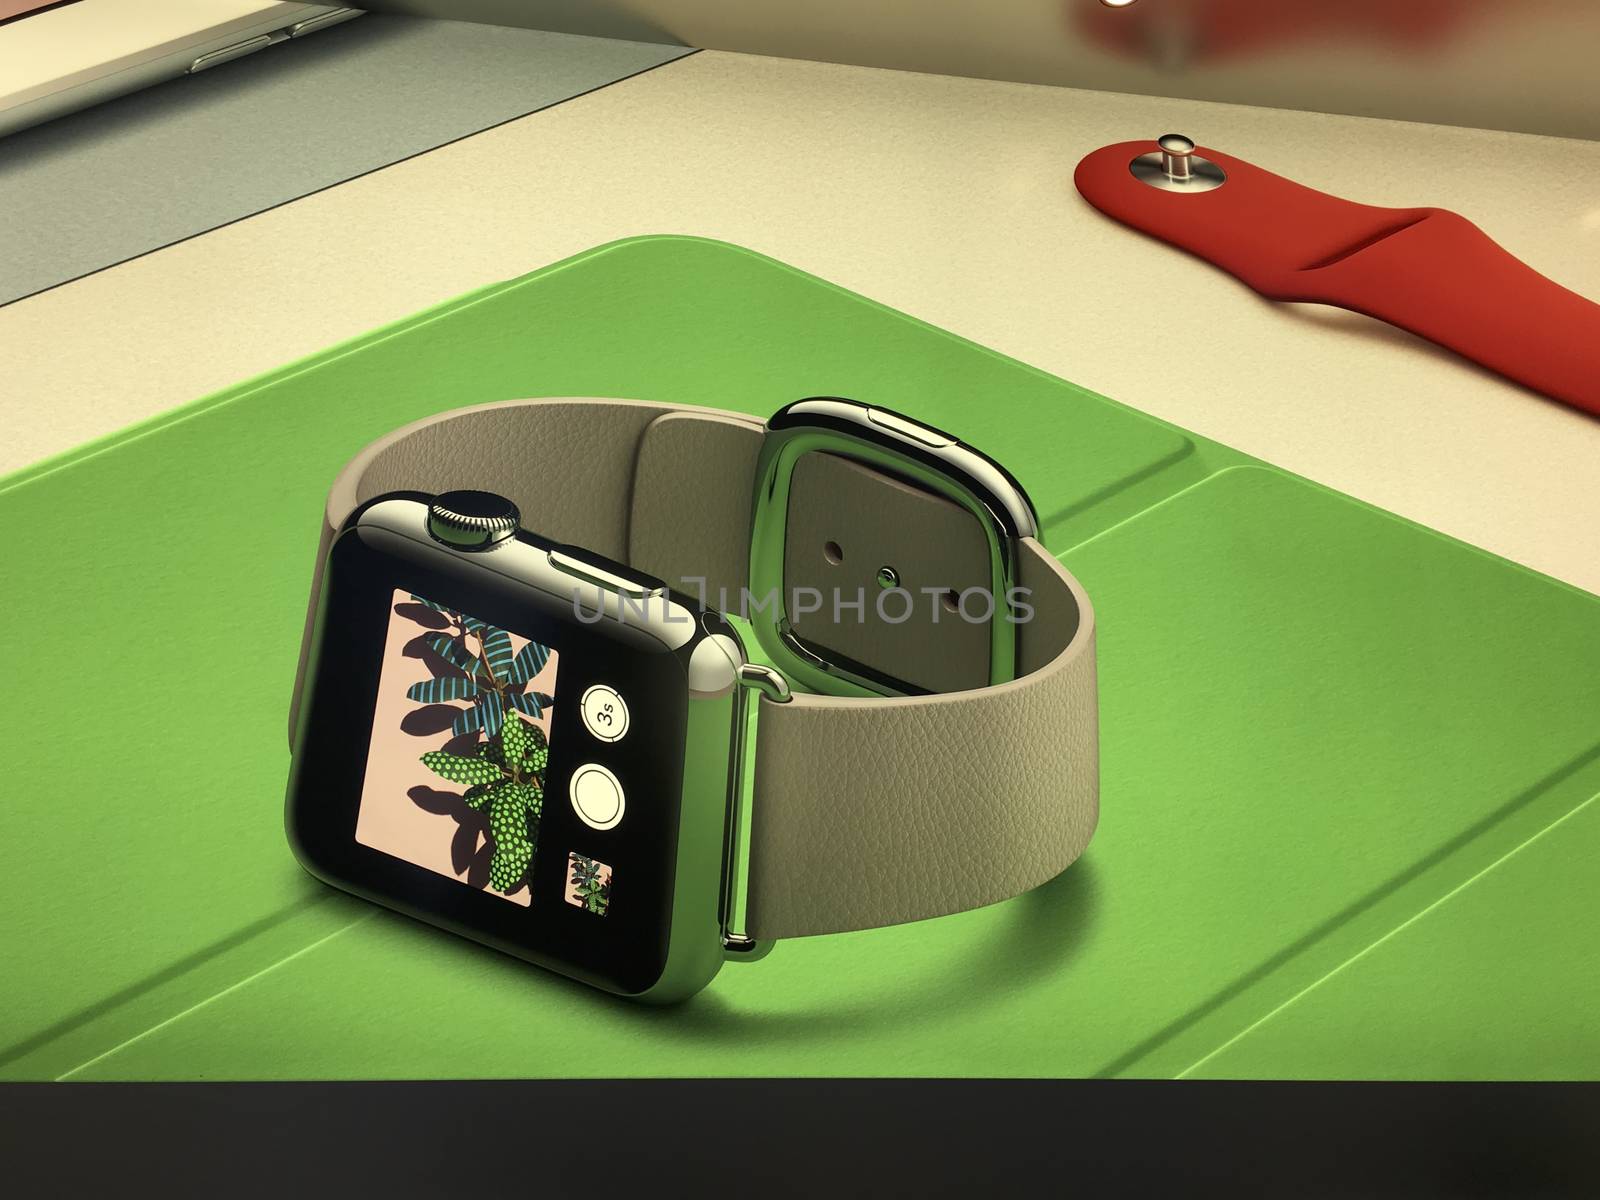 Shopping inside Apple Store in New York City,  UNITED STATES AMERICA - FEB 23 2016: New Apple Watch smartwatch displaying on a poster inside Apple Store, New York, USA